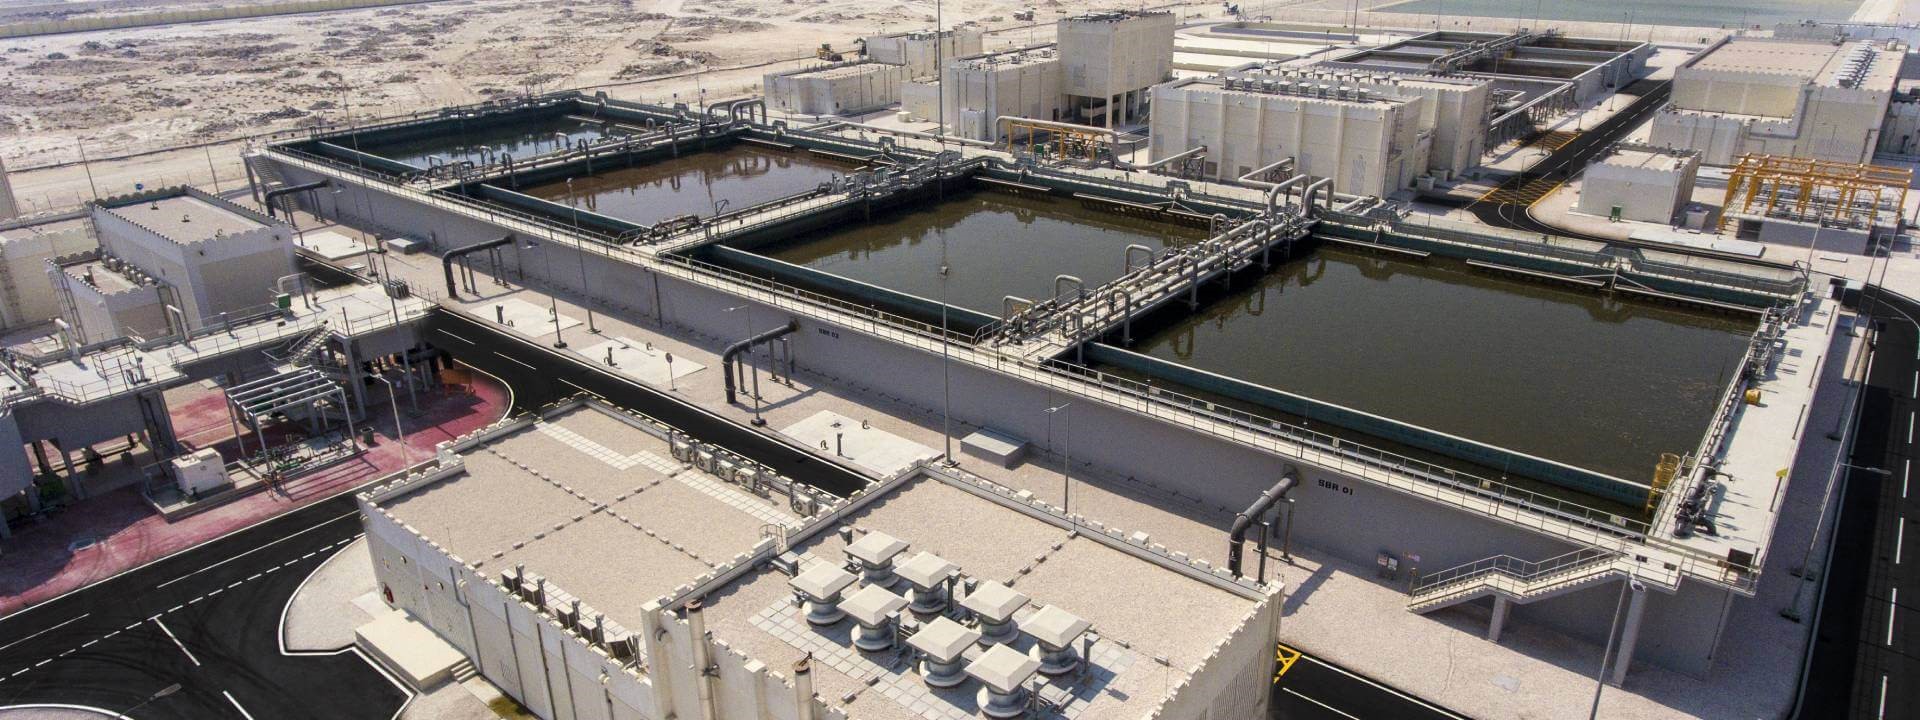 The Industrial Area Sewage Treatment Works in Qatar